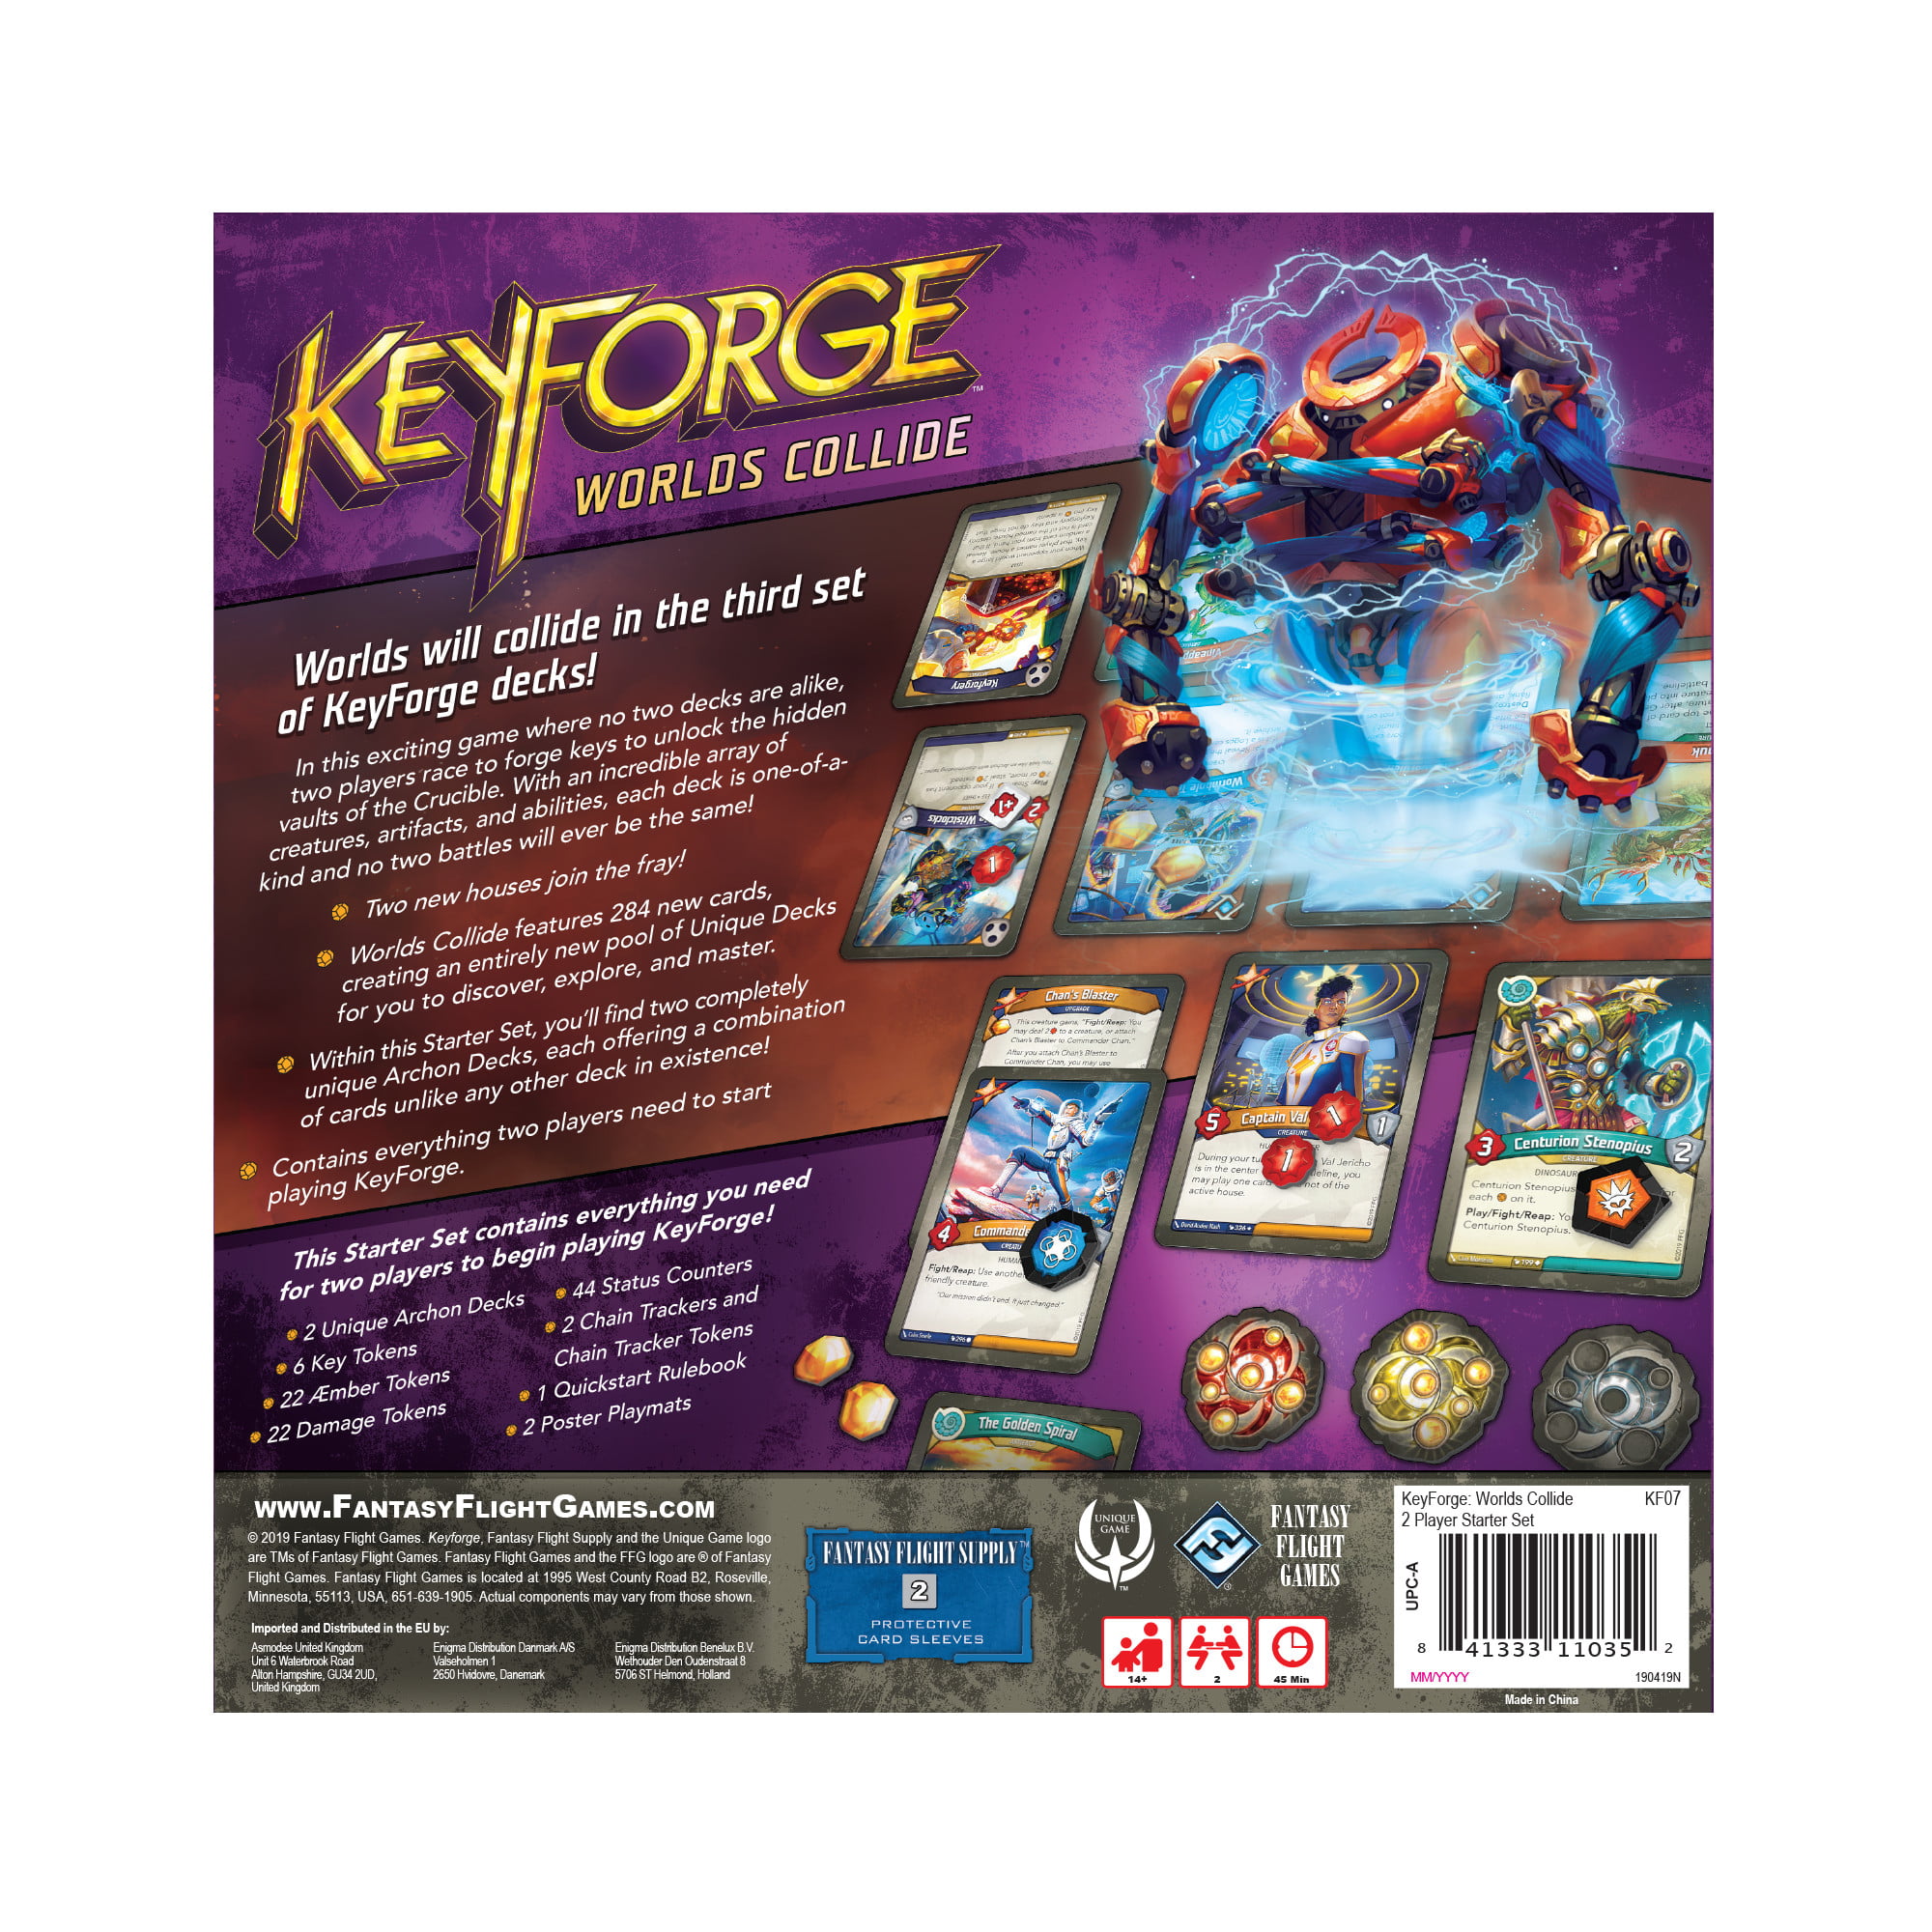 Brand New And Sealed Box KeyForge Worlds Collide 2 Player Starter Set 